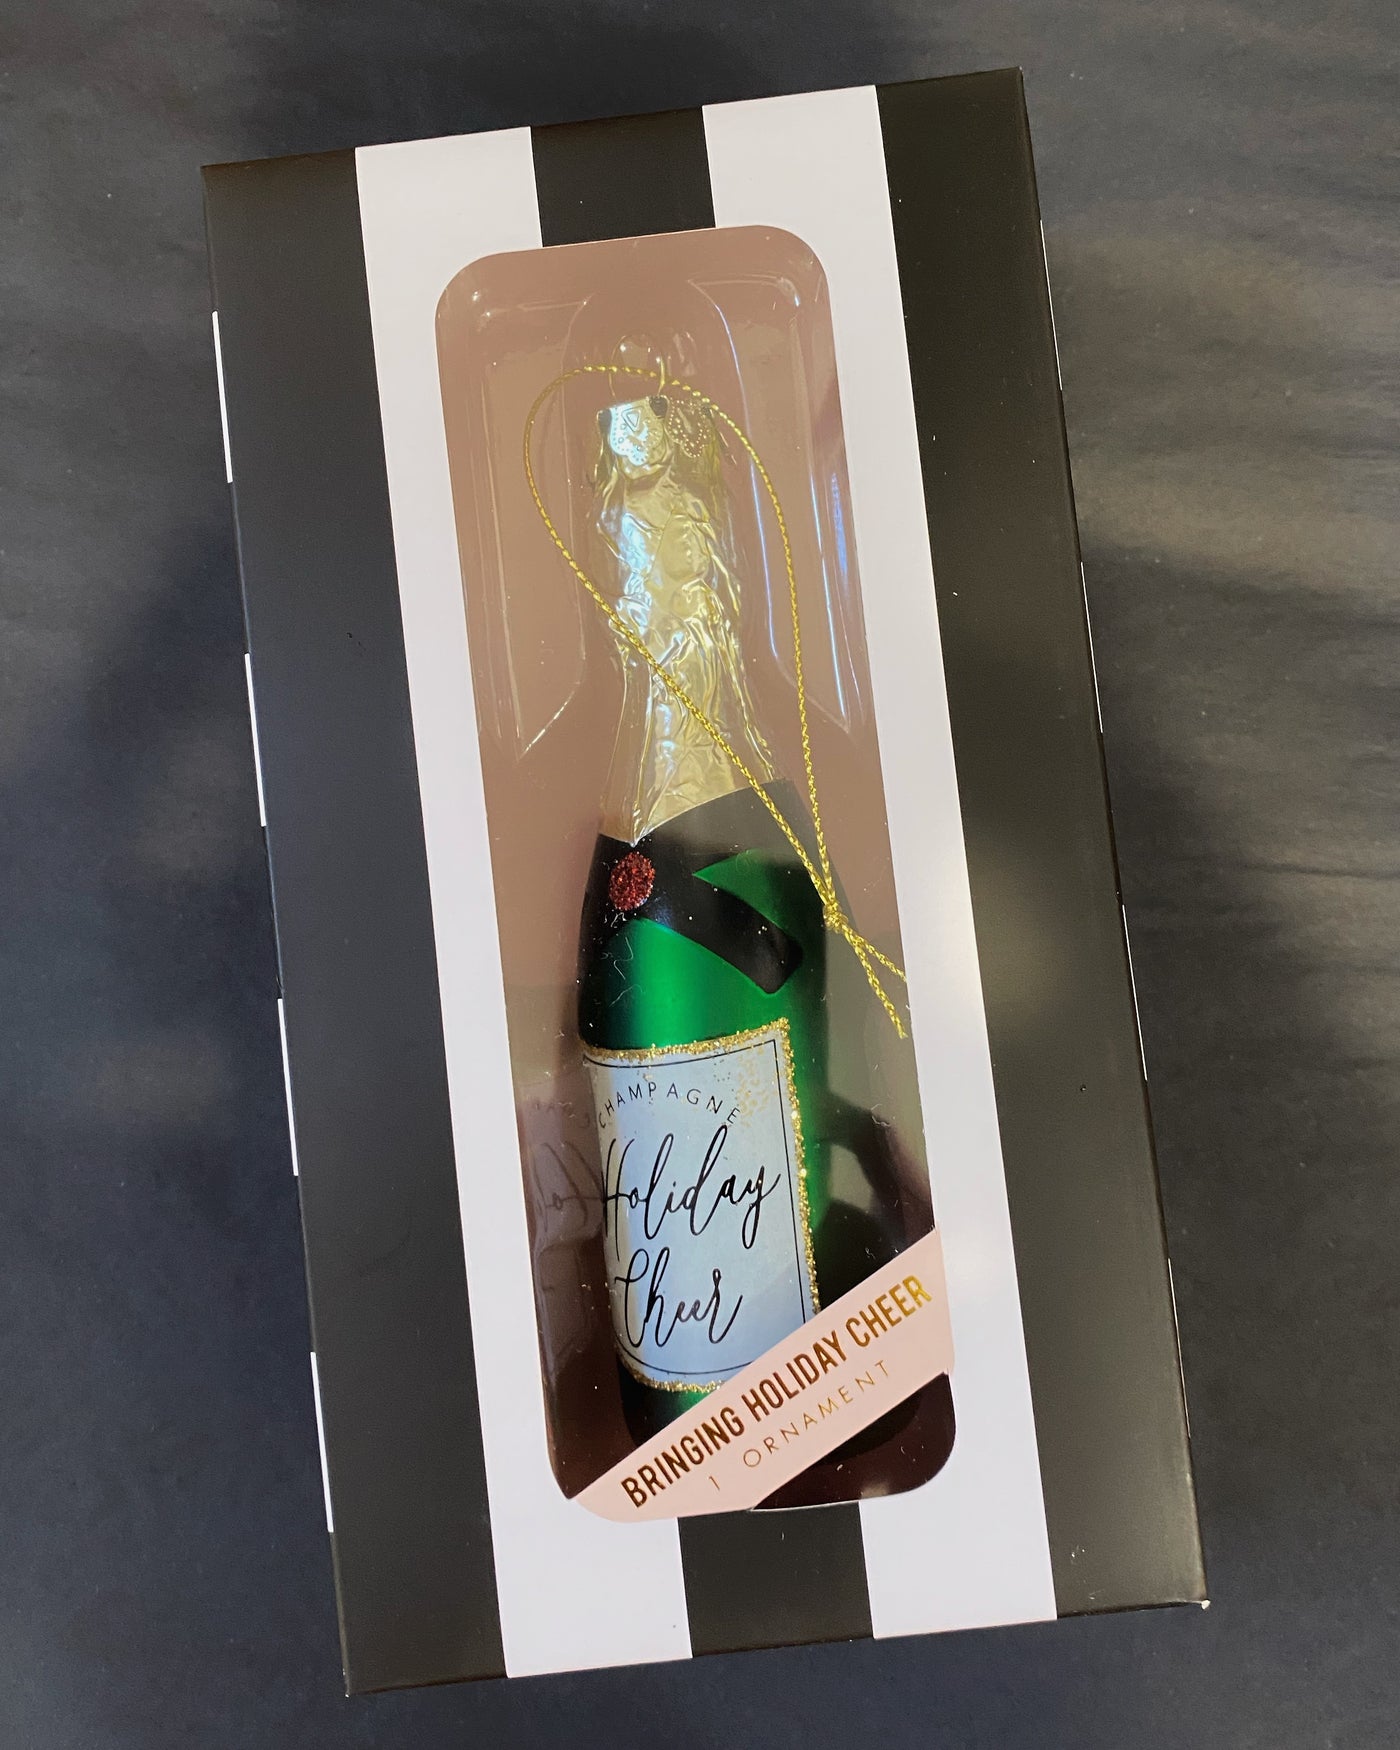 Holiday Cheer Champagne Bottle Ornament